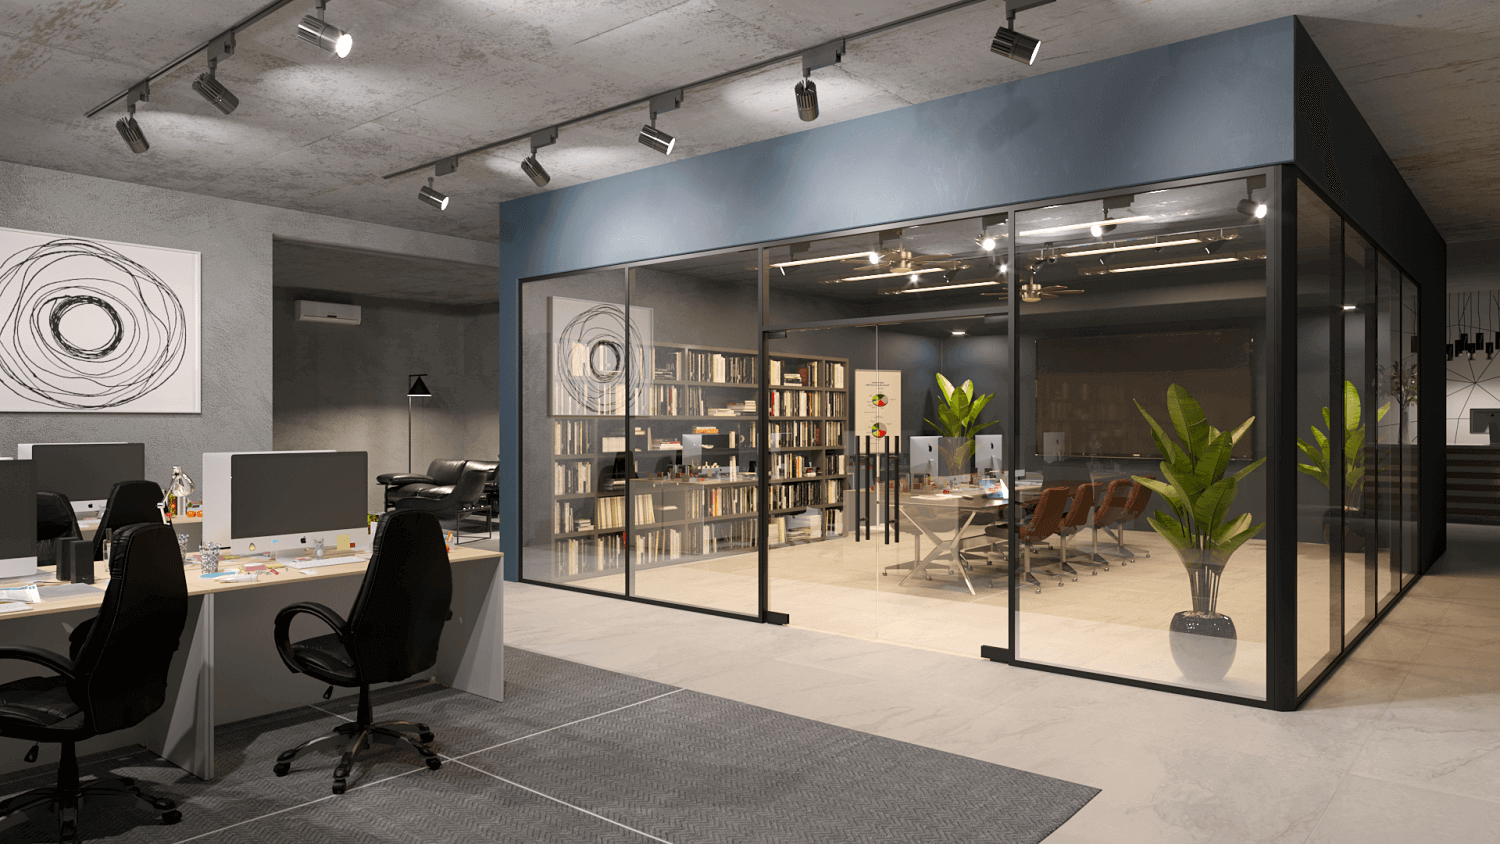 The Place of Modular Office Walls in the Future Workplace